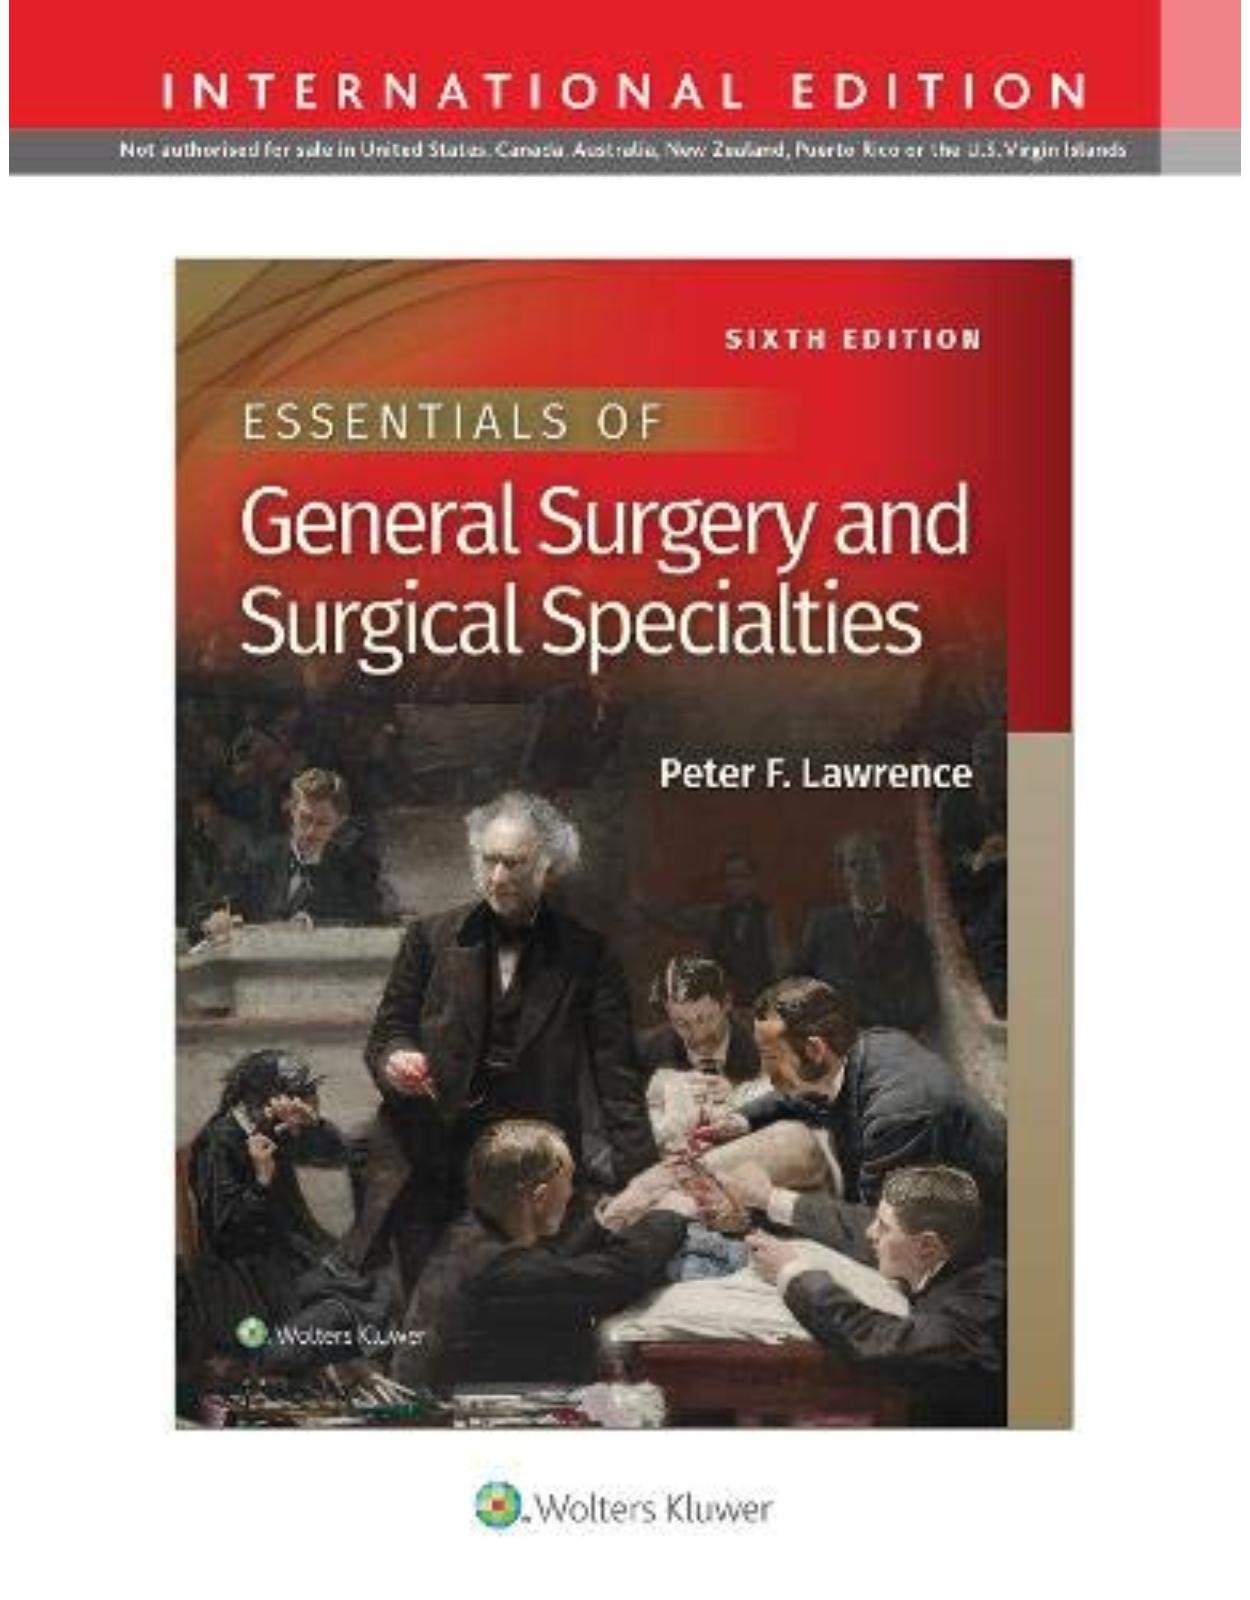 Essentials of General Surgery and Surgical Specialties 